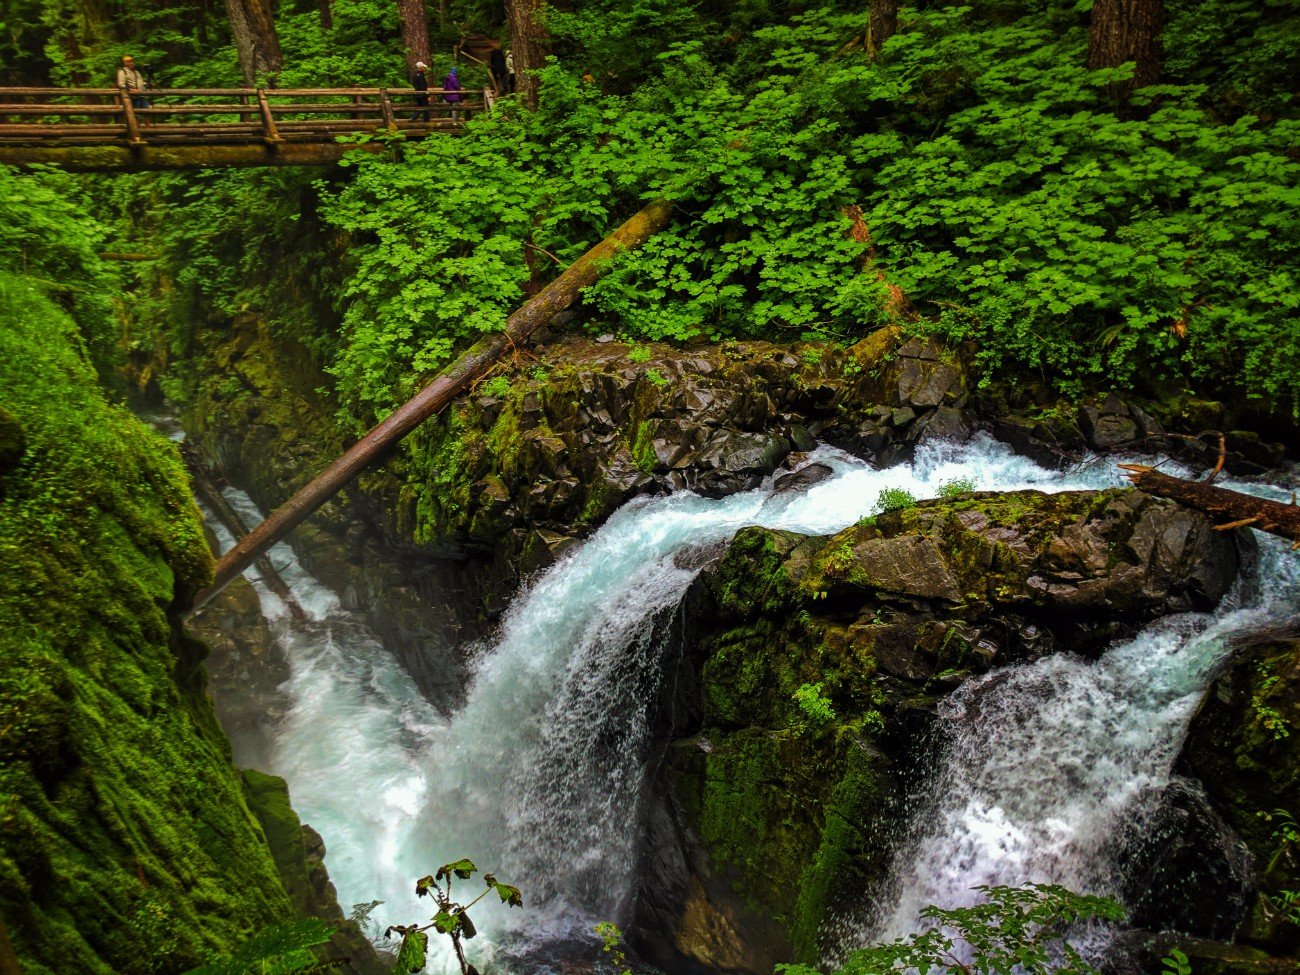 Mossy-gorge-and-waterfalls-in-Rainforest-Sol-Duc-Falls-Olympic-National-Park-9.jpg